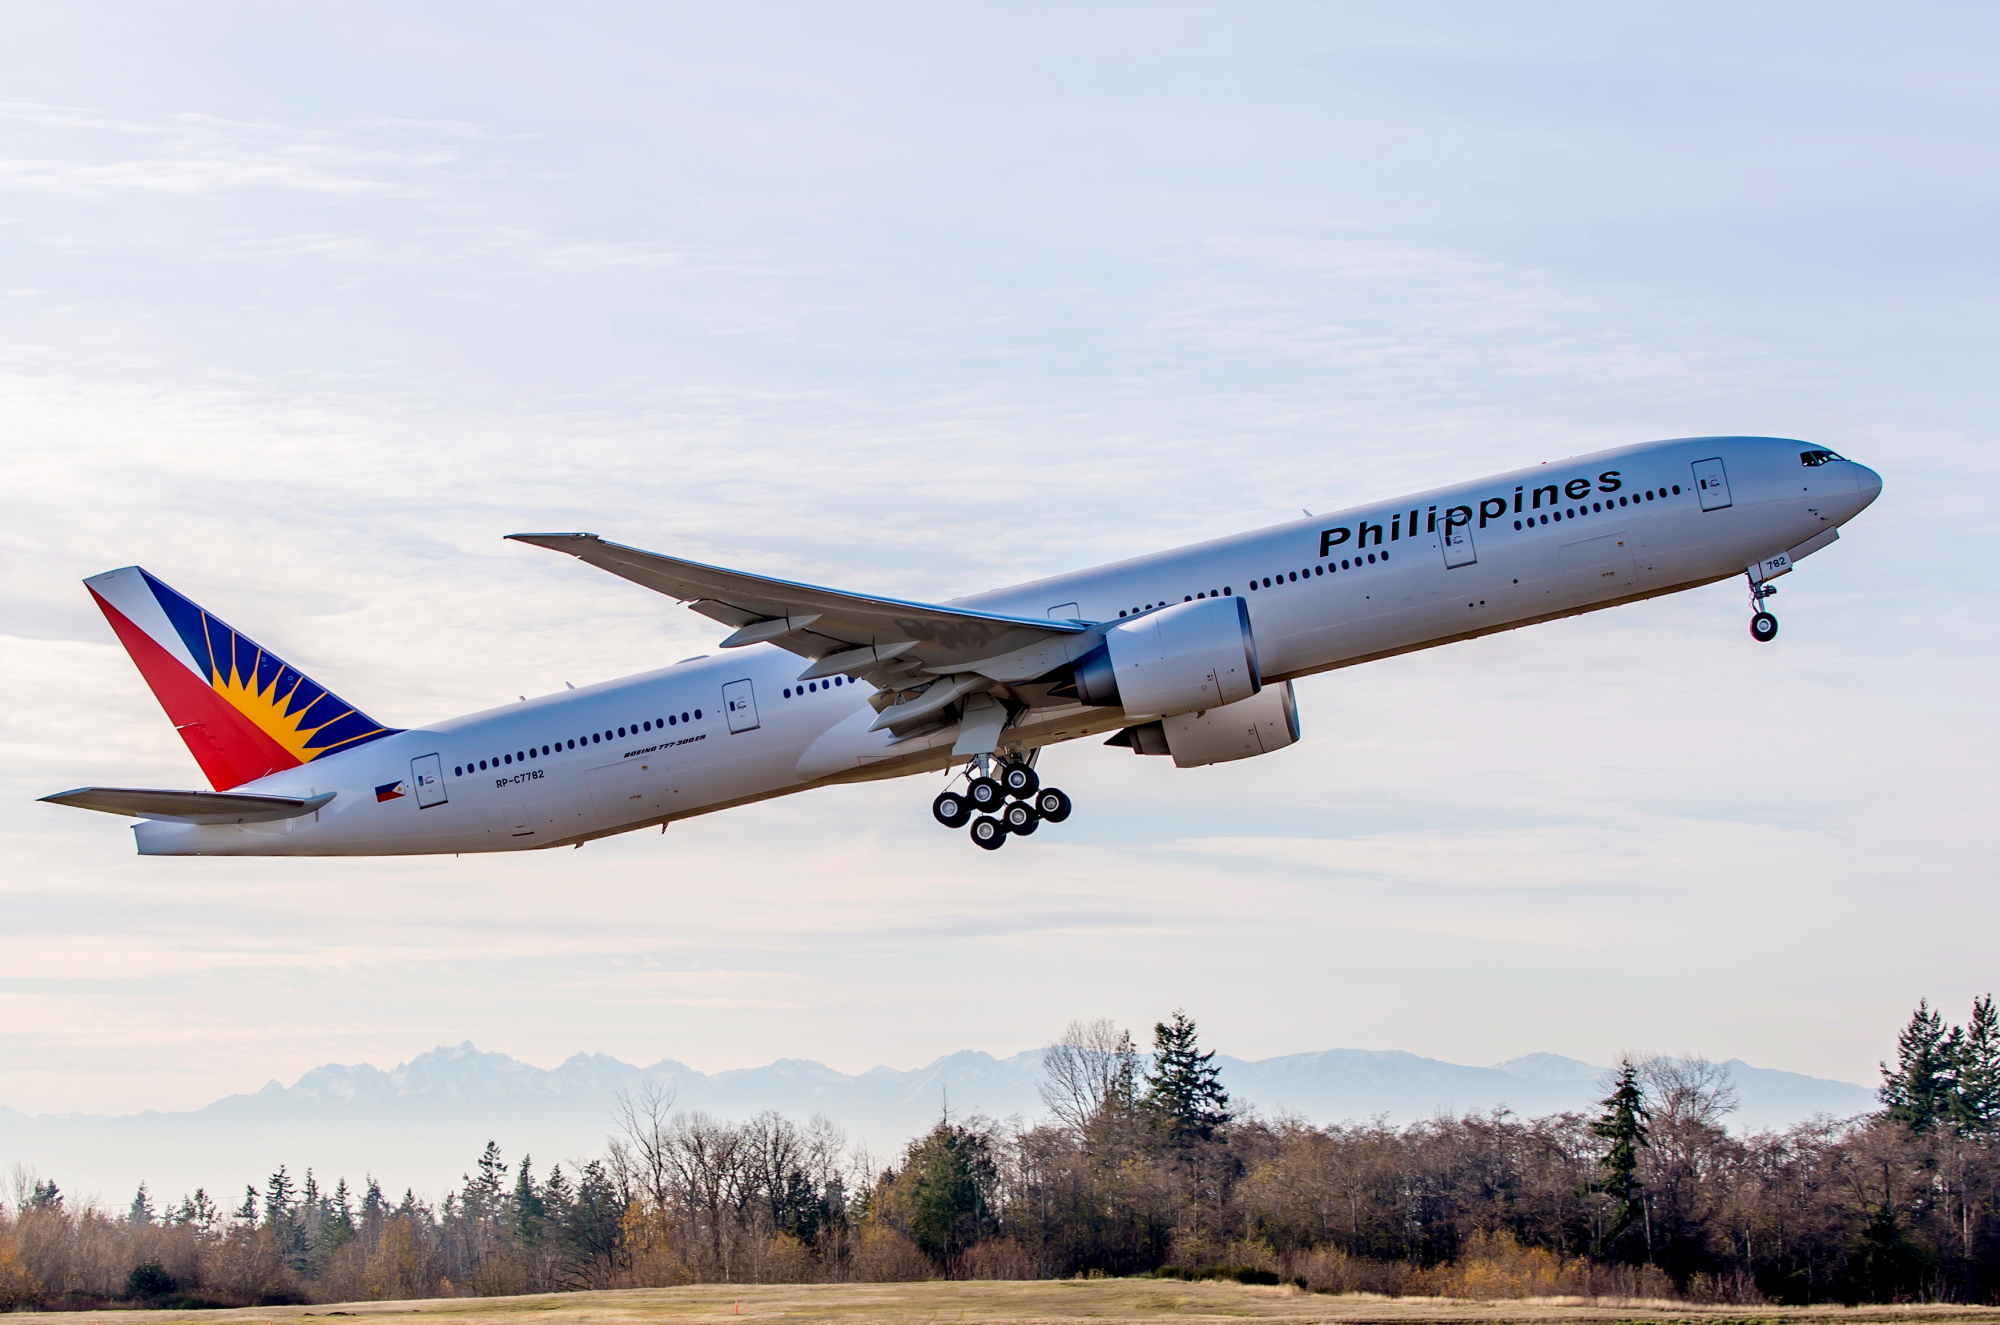 Philippine Airlines' 10th Boeing 777-300ER (reg. RP-C7782) takes off. Click to enlarge.